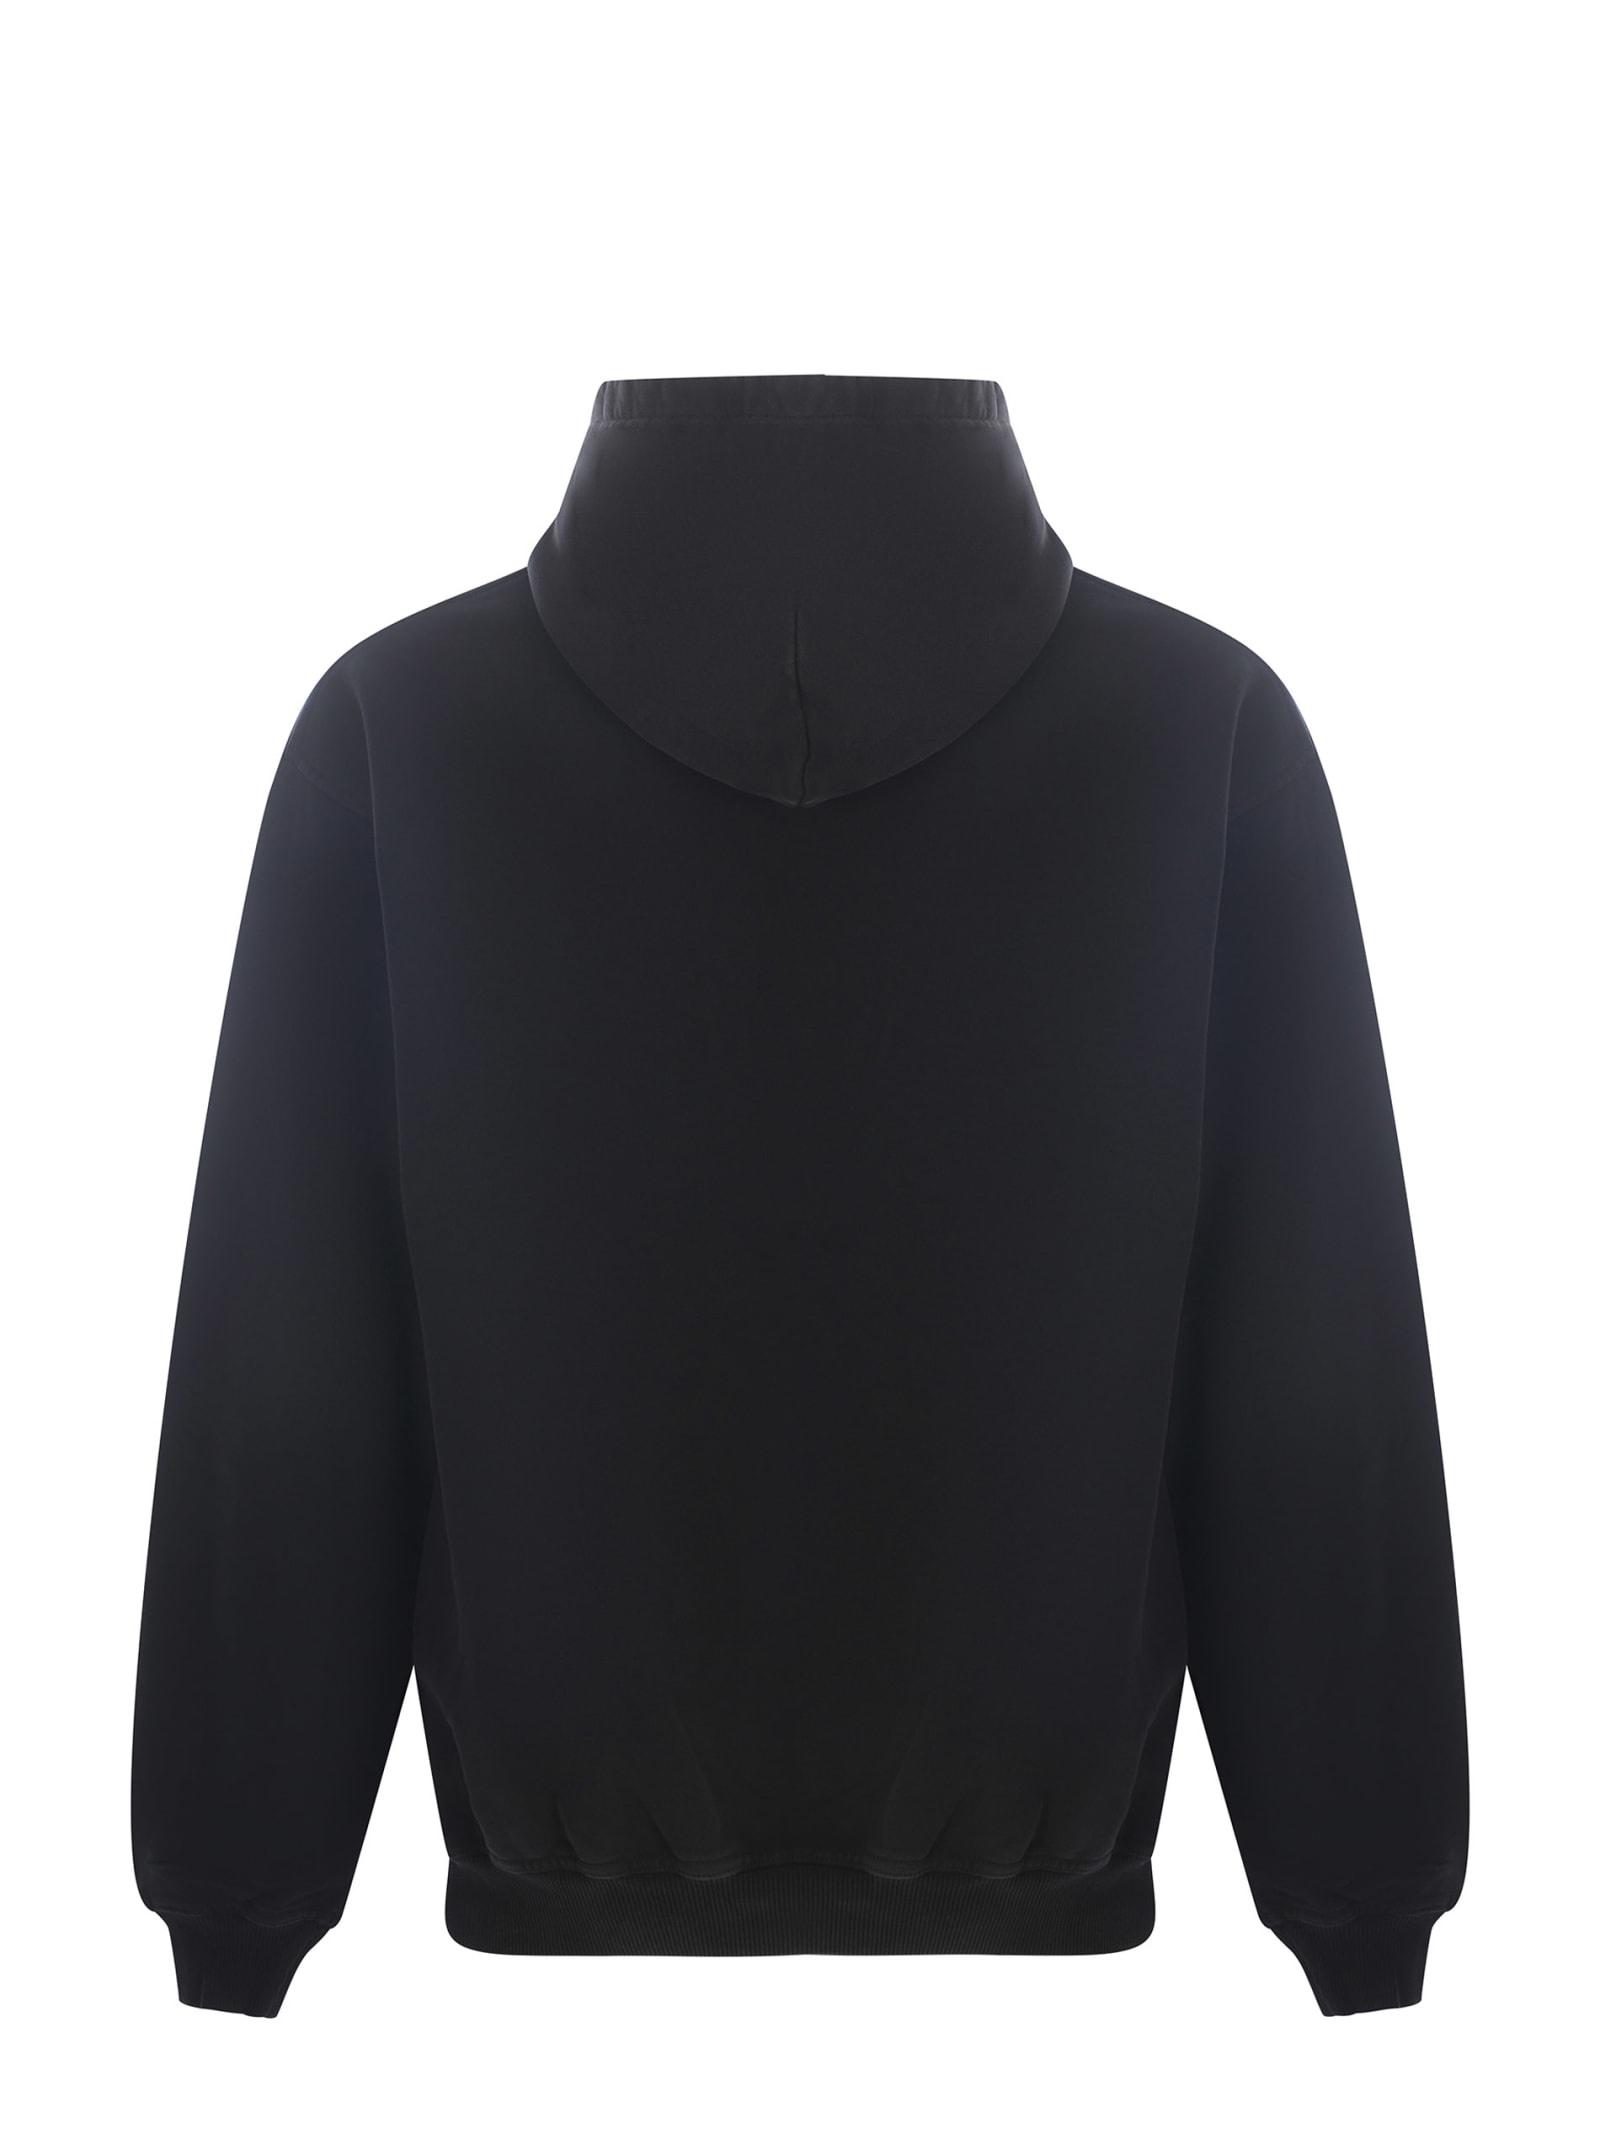 Shop Represent Hooded Sweatshirt  Thoroughbred Made Of Cotton In Nero